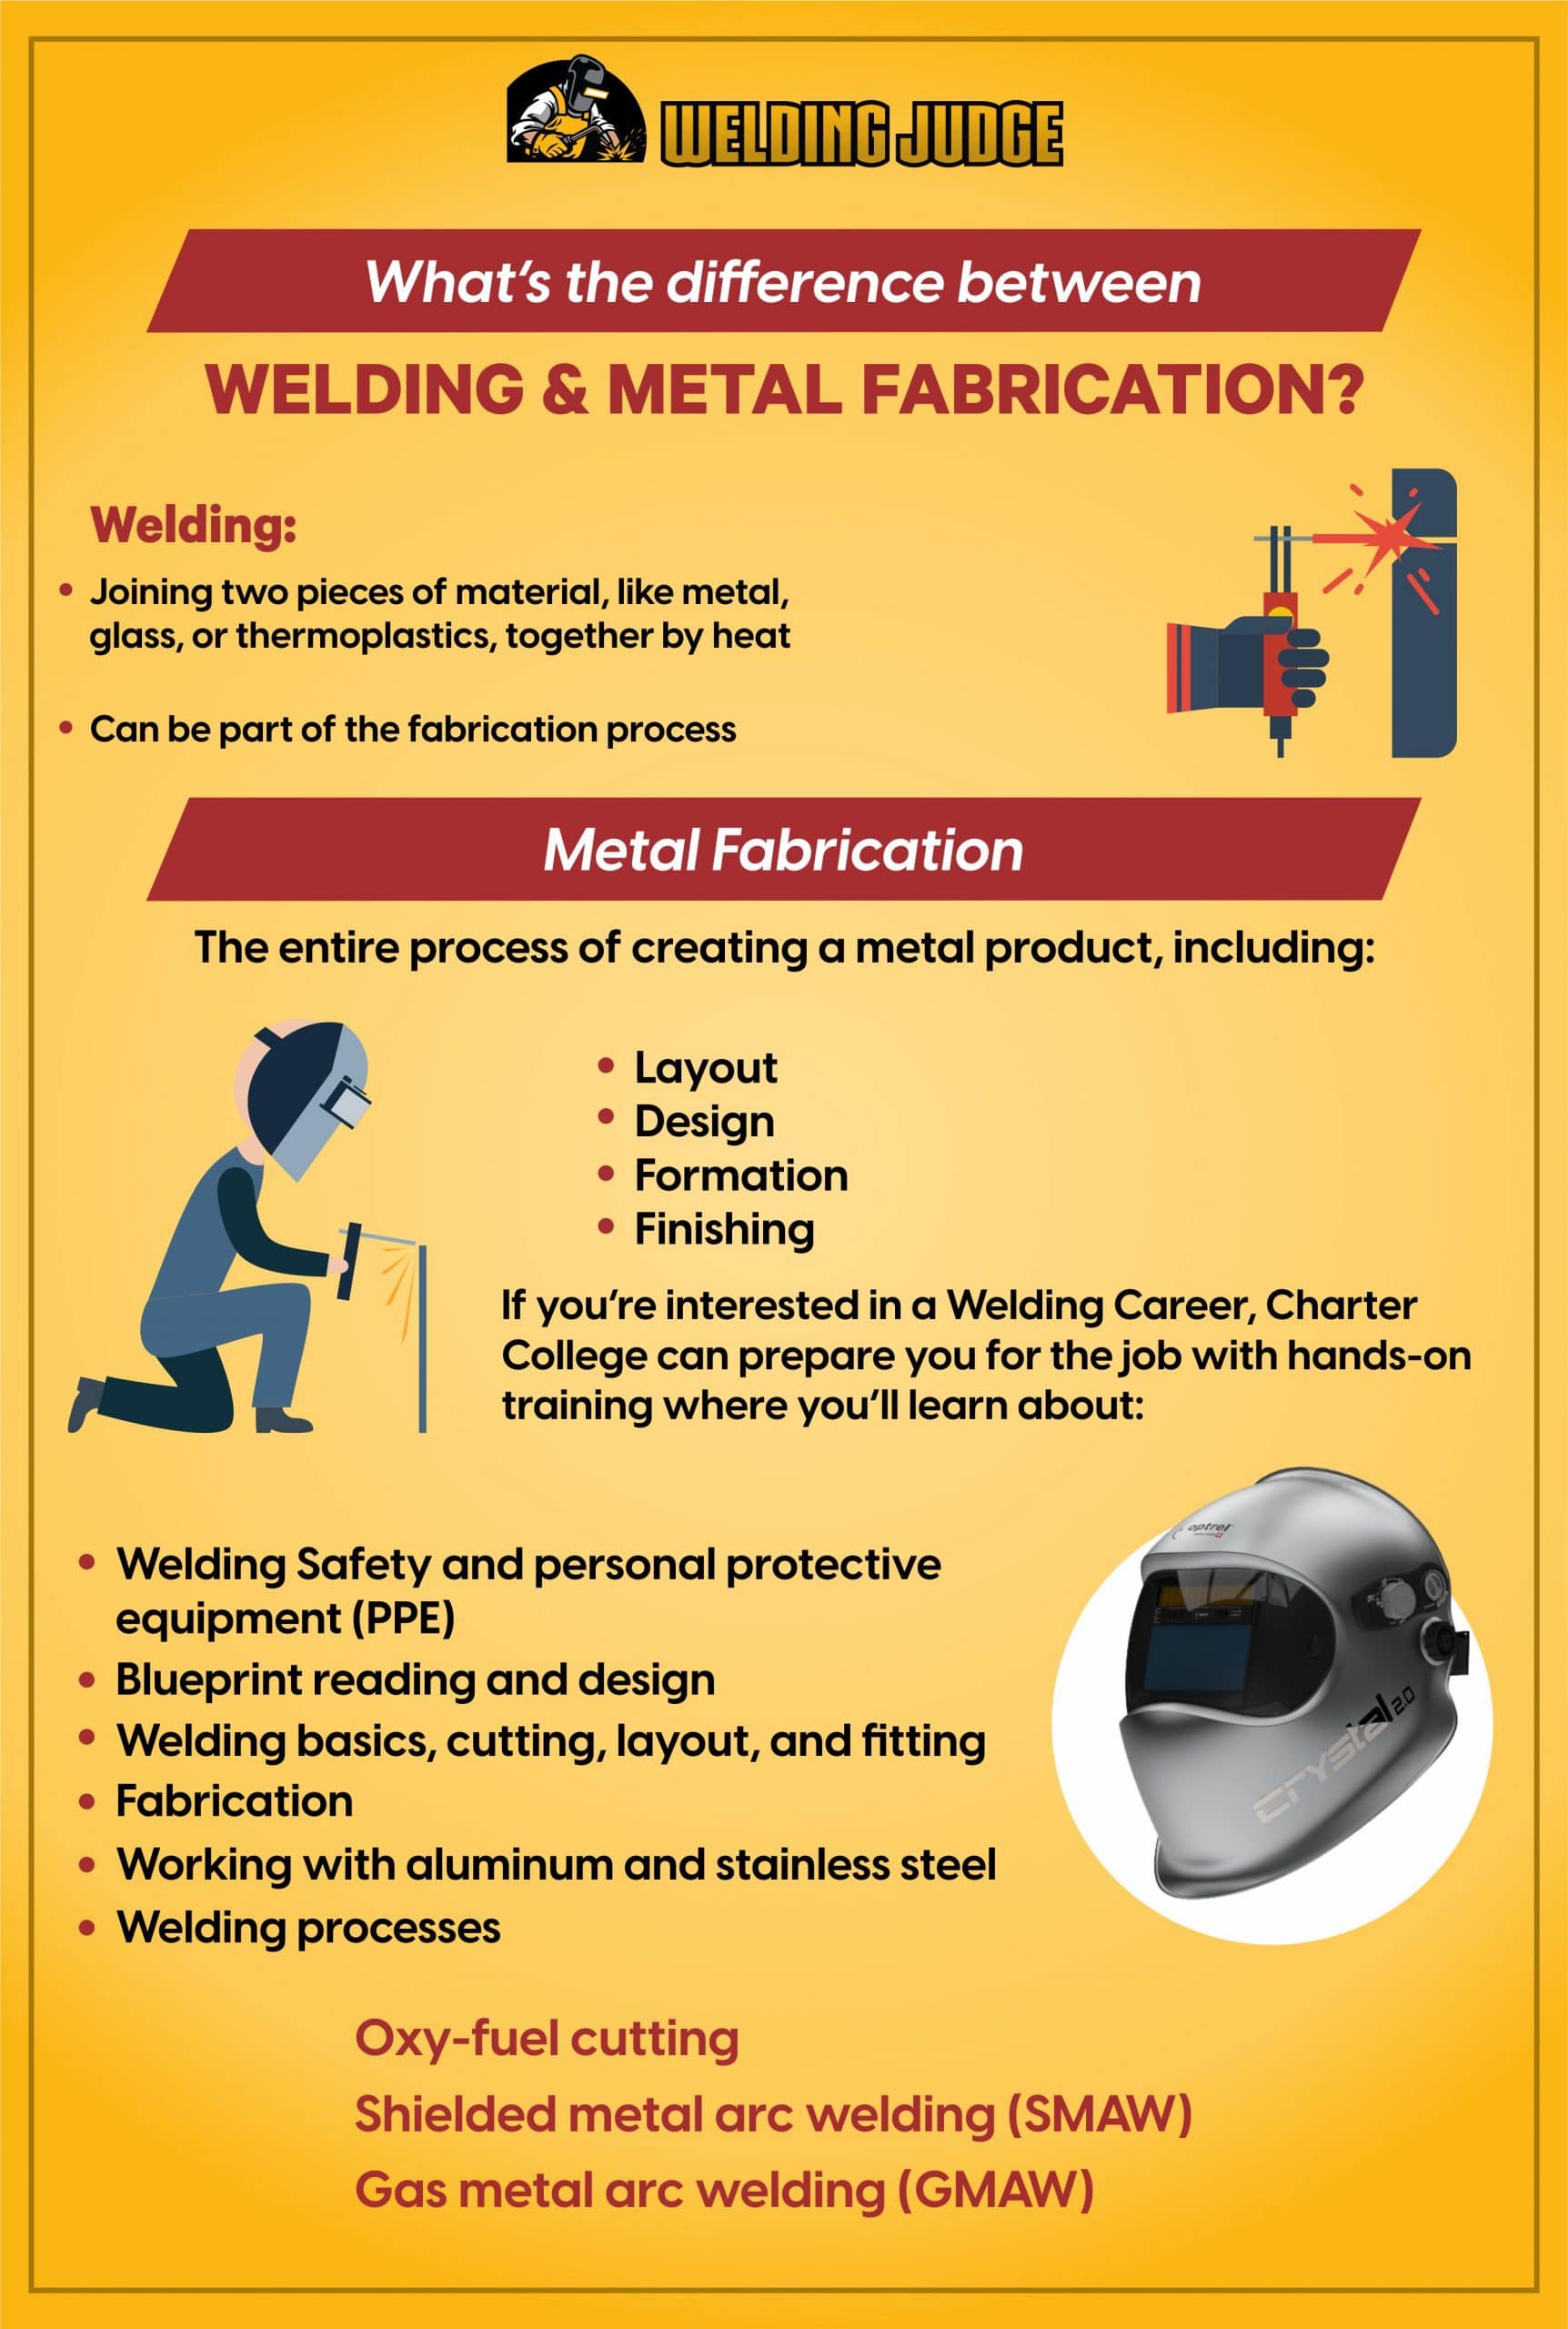 What's the difference between welding & metal fabrication infograph